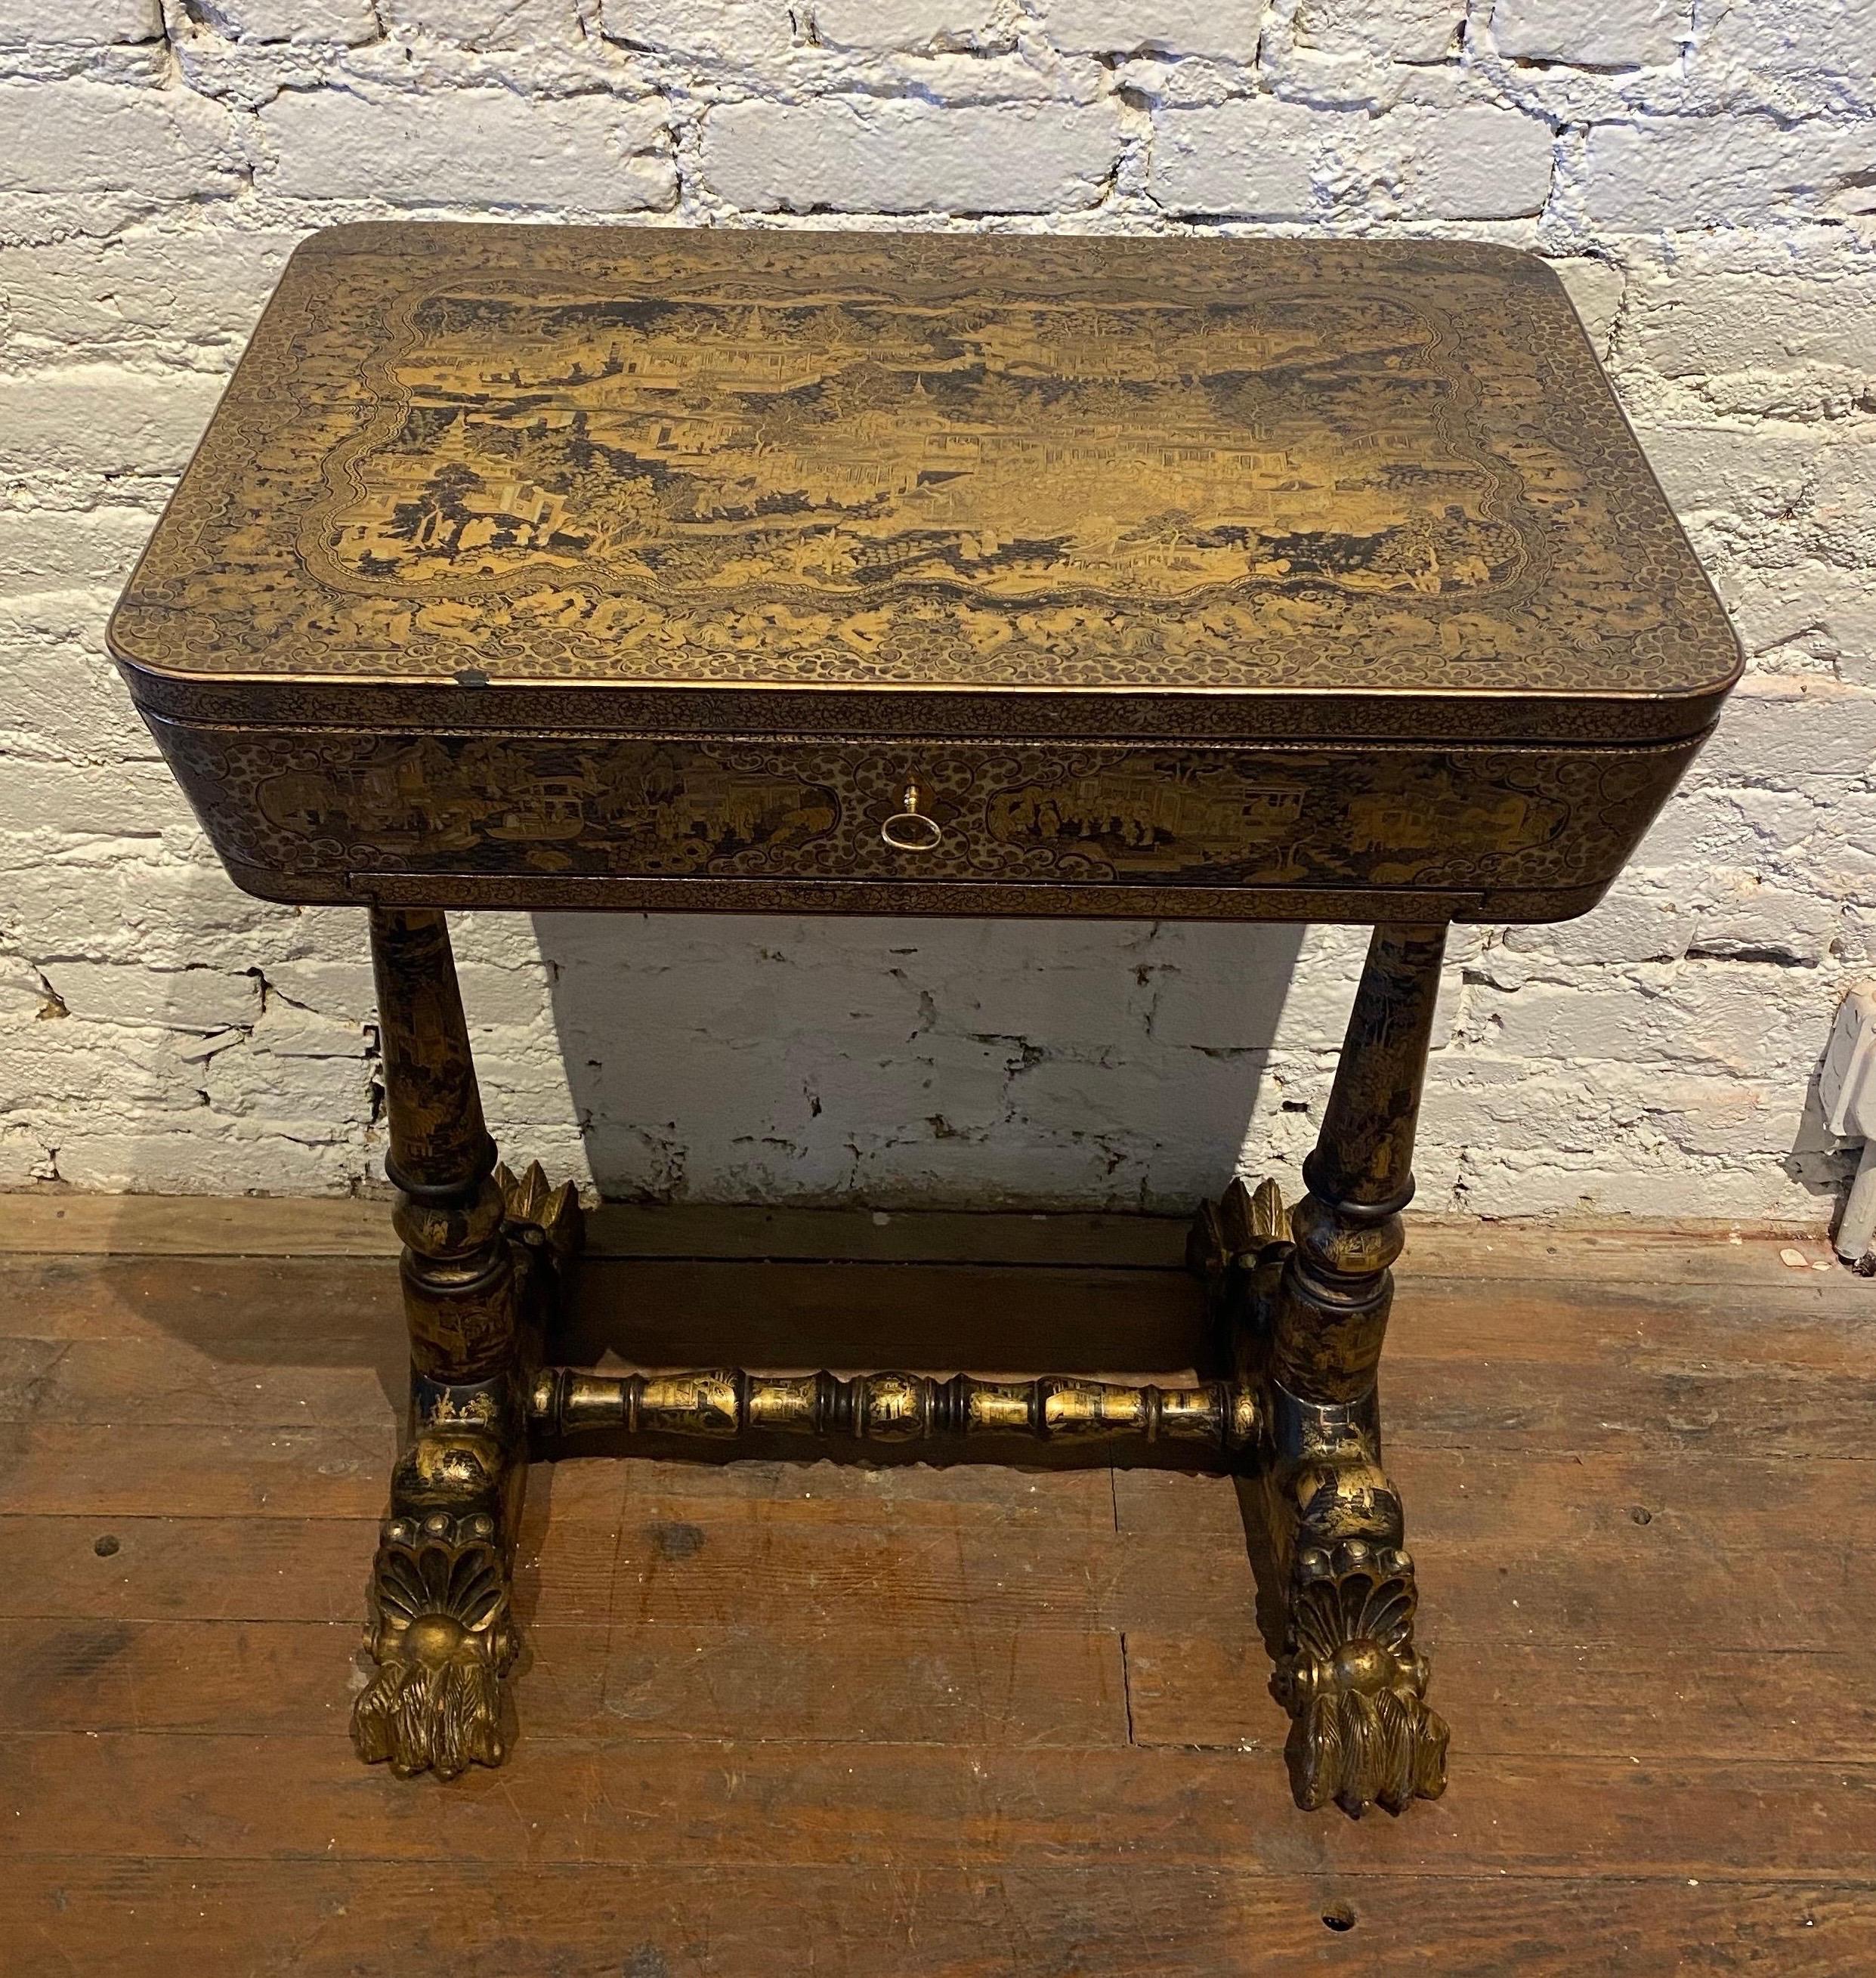 Very good Chinese export sewing table with removable trays and bone sewing tools/spools. Remarkable condition original lacquer work chinoiserie table with all the bells and whistles.